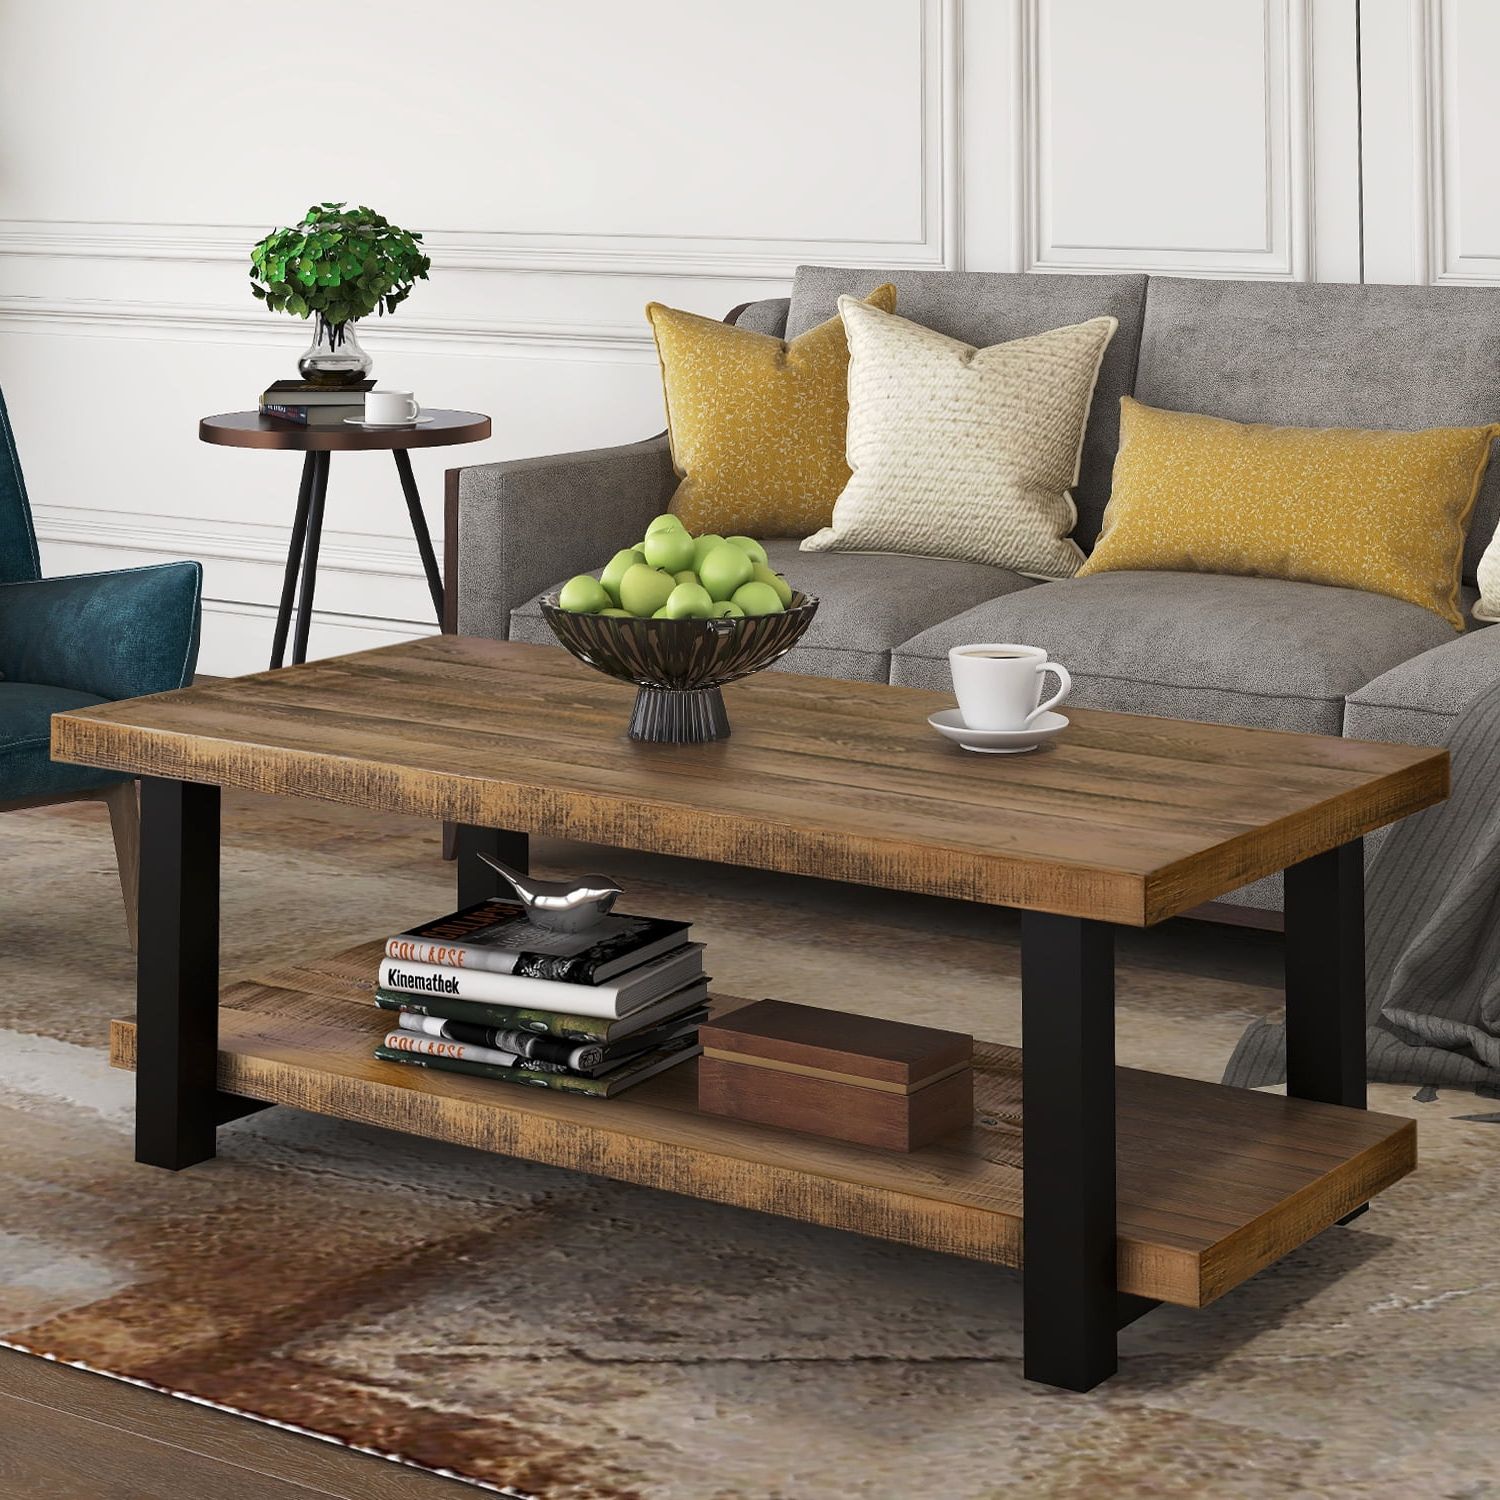 Topcobe Rustic Natural Coffee Table With Storage Shelf, Side End Table Within Rustic Wood Coffee Tables (View 3 of 20)